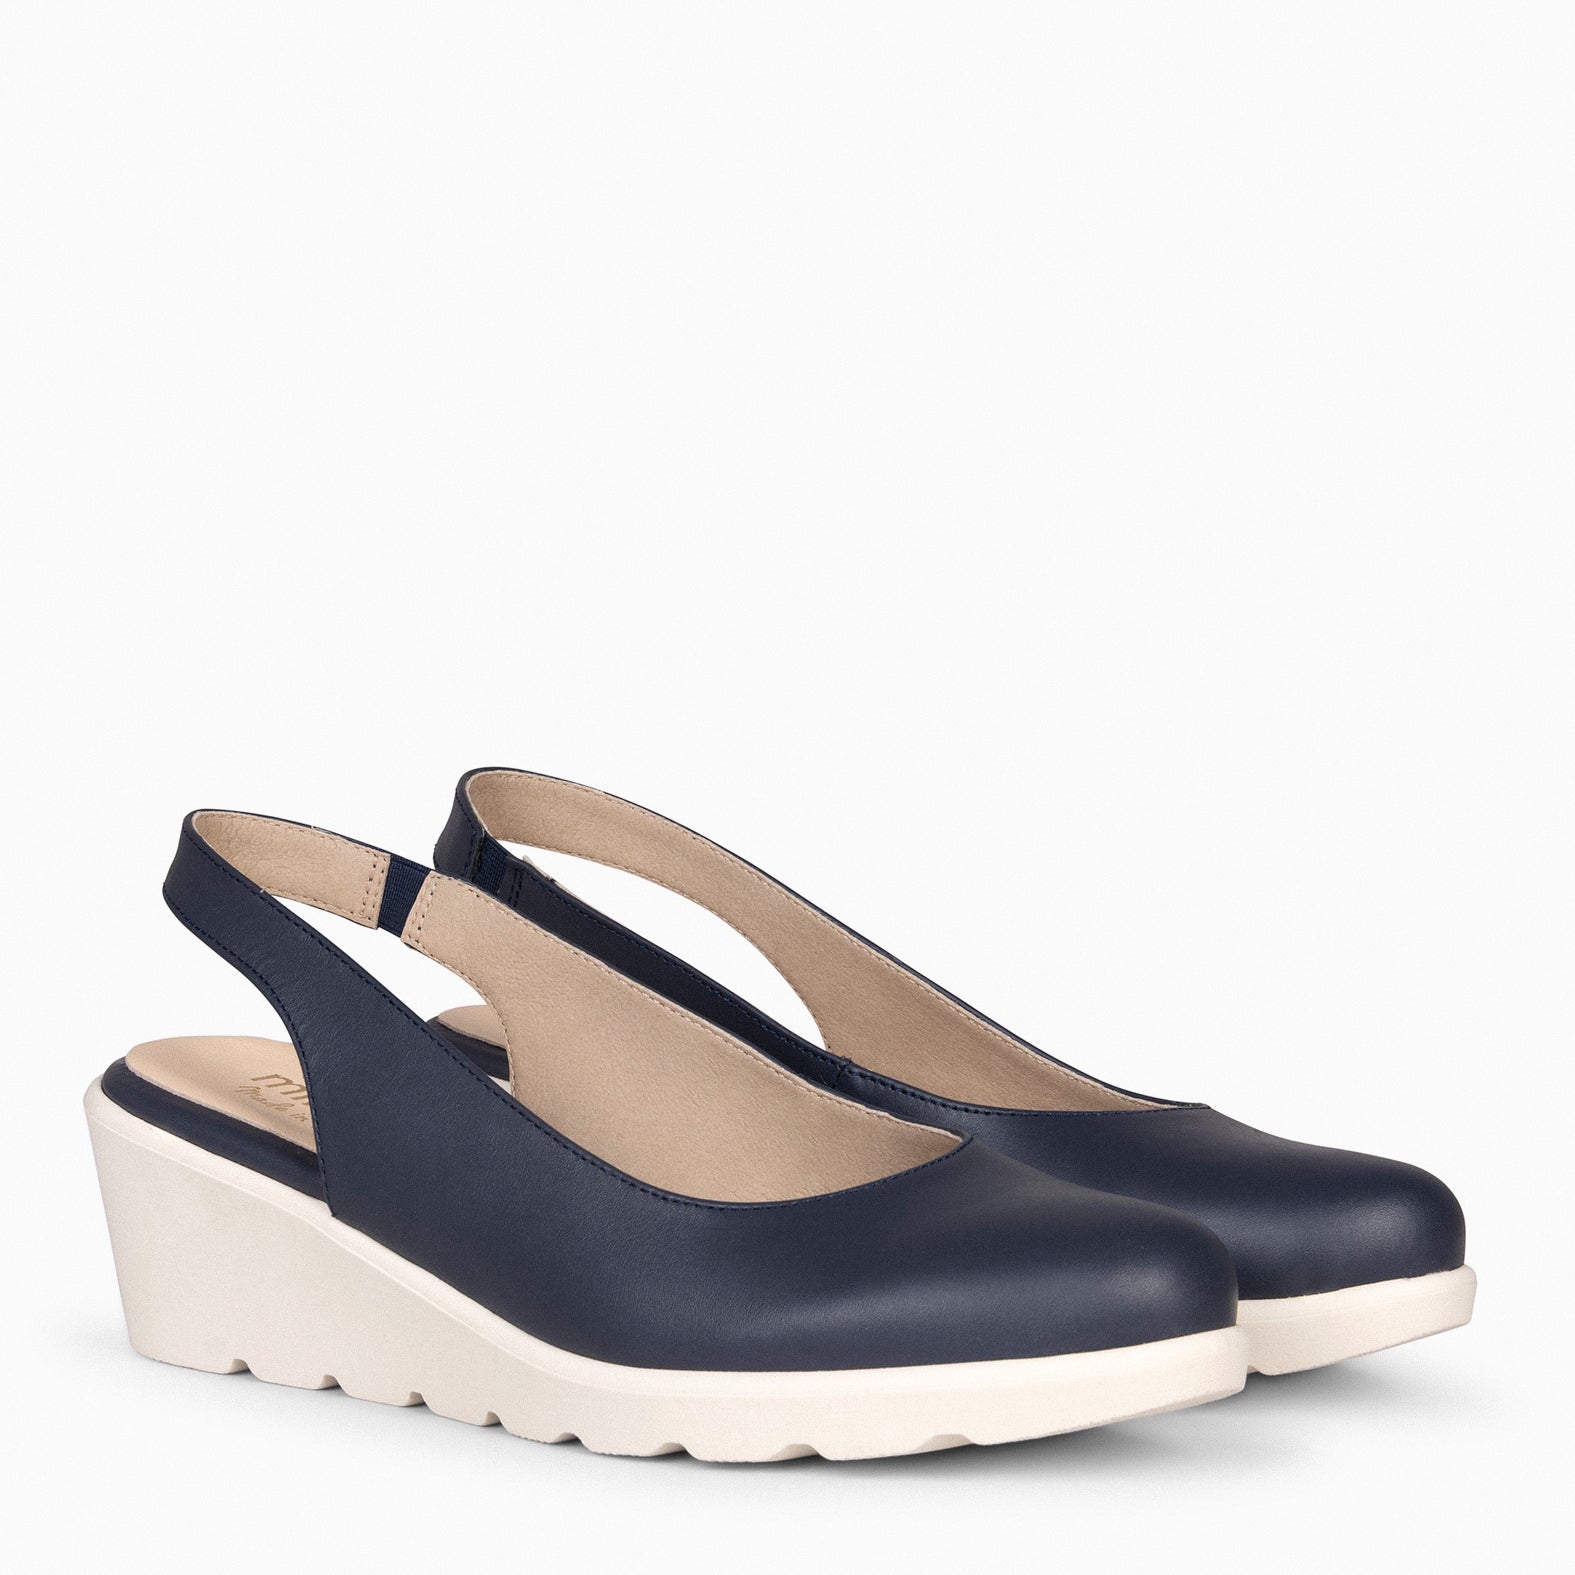 CLARISSE – NAVY WEDGE SLINGBACK SHOES